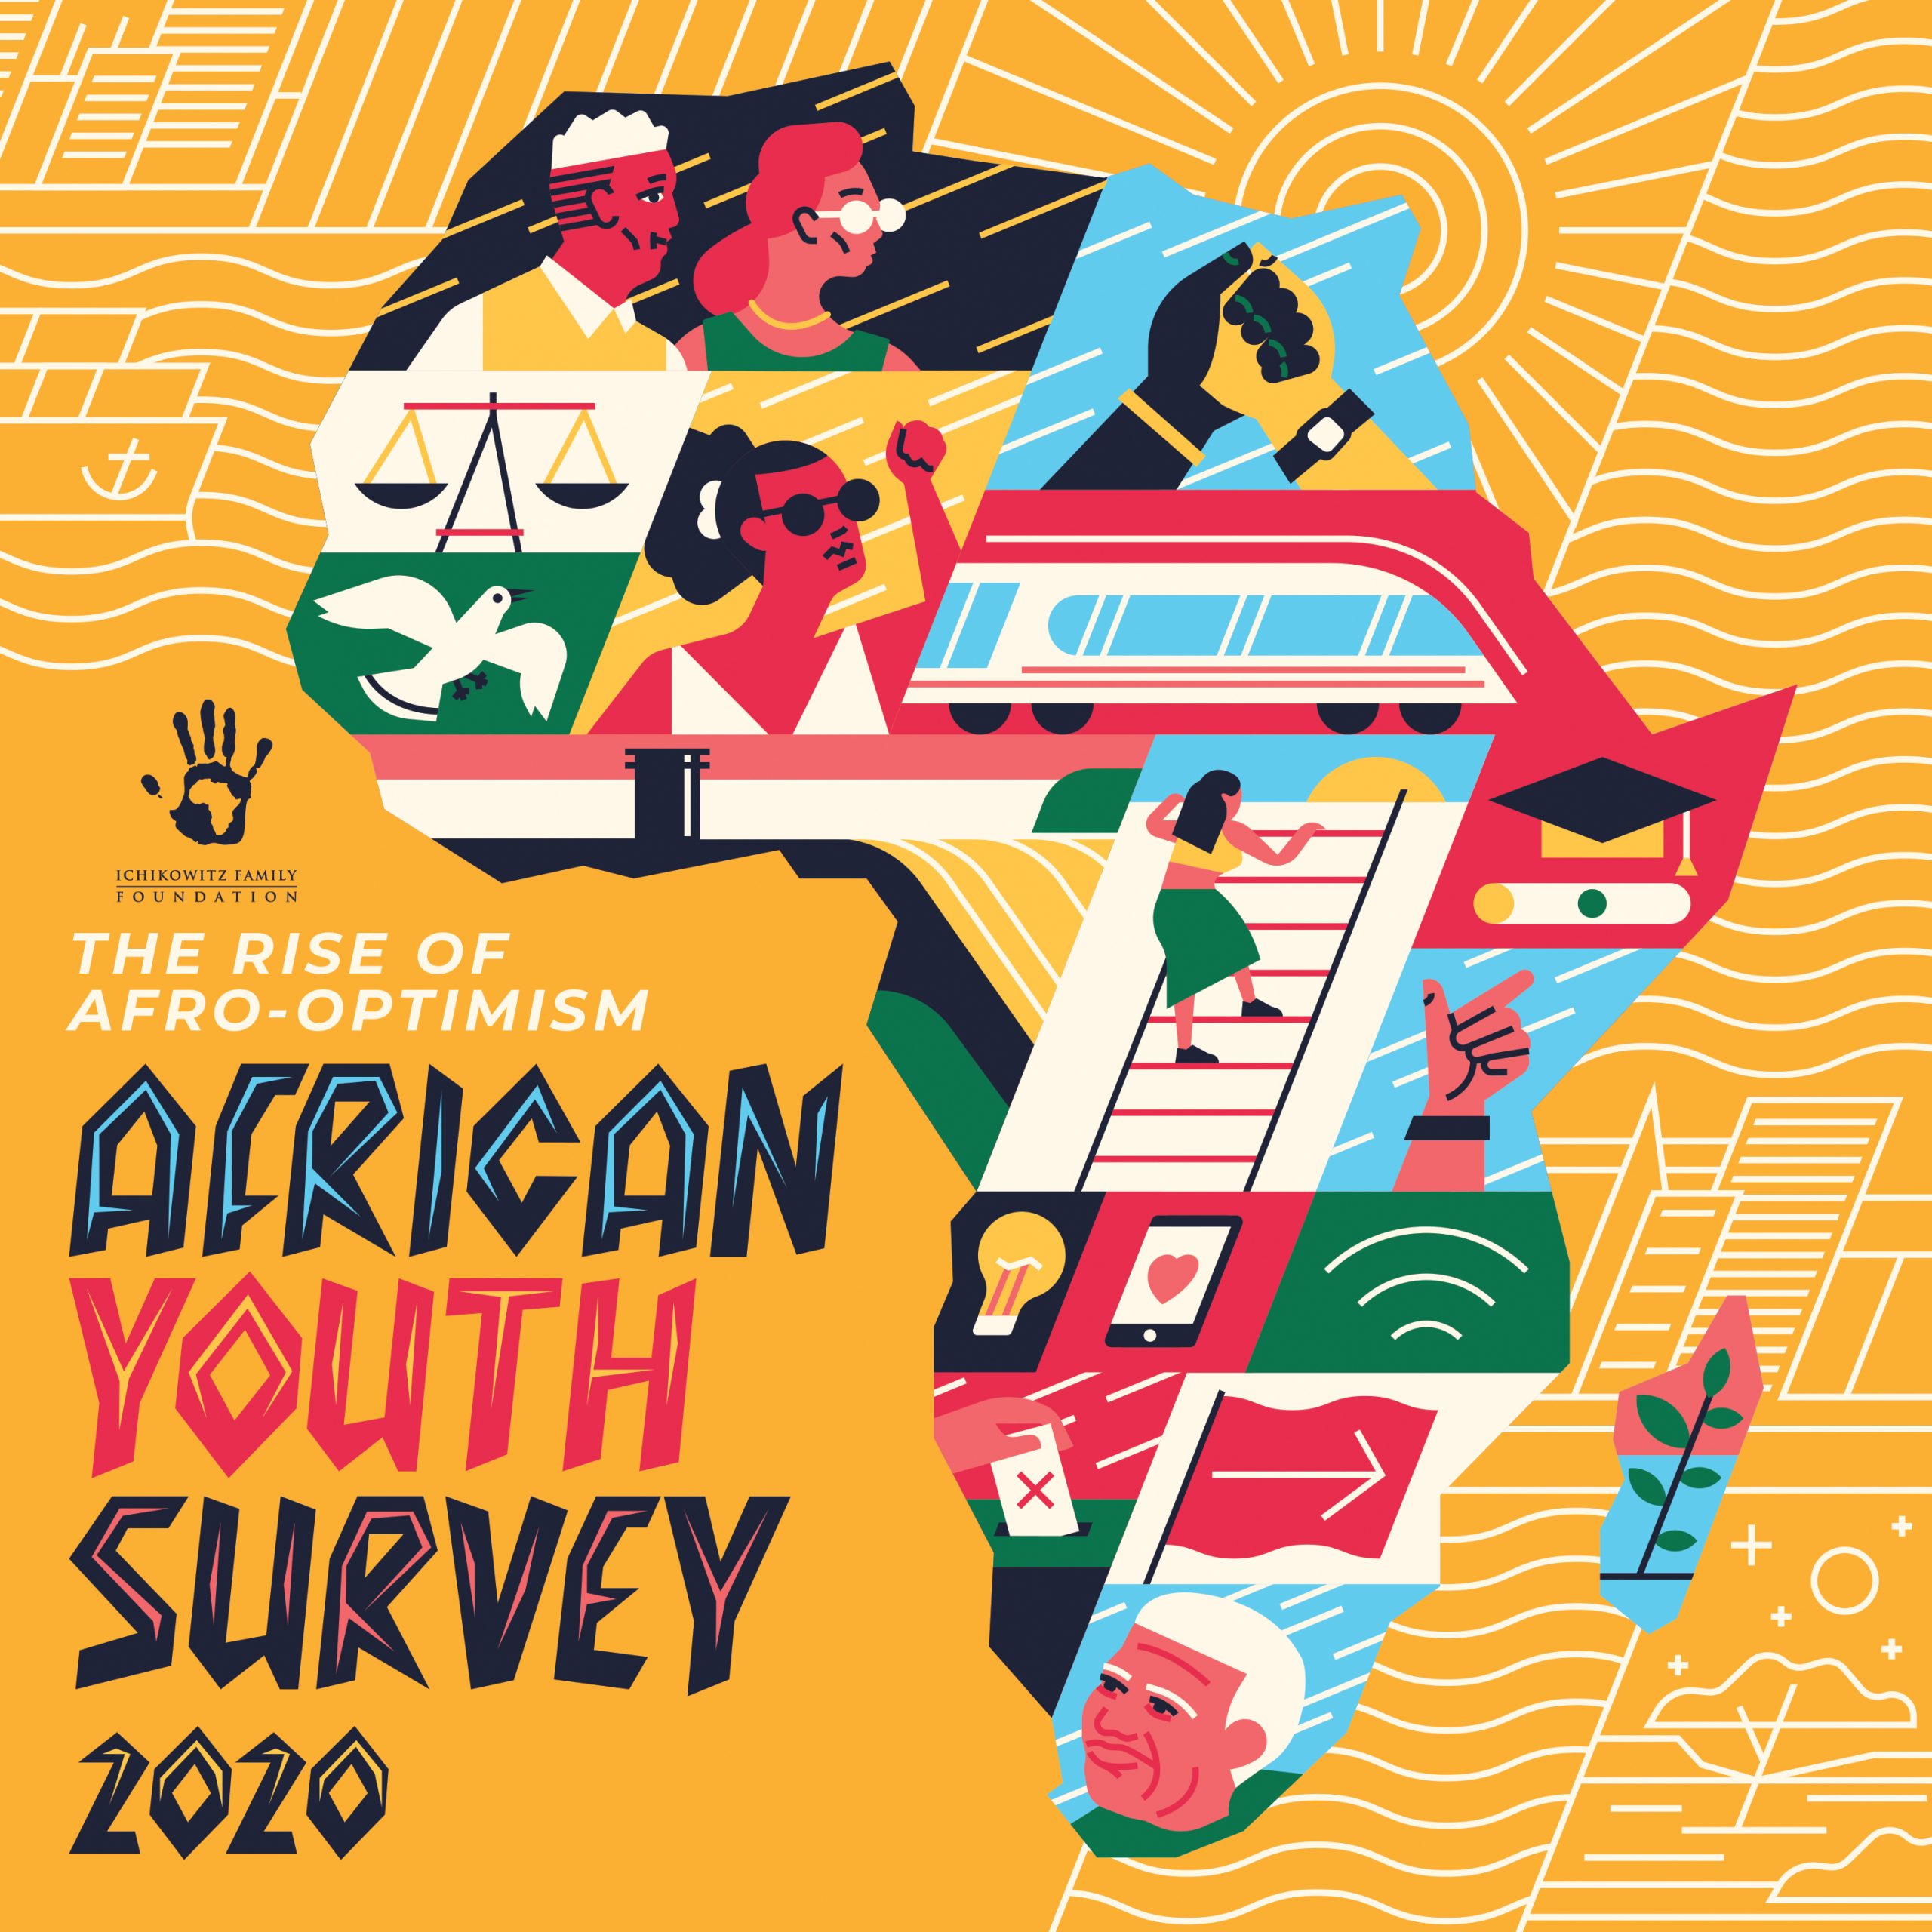 African Youth Survey